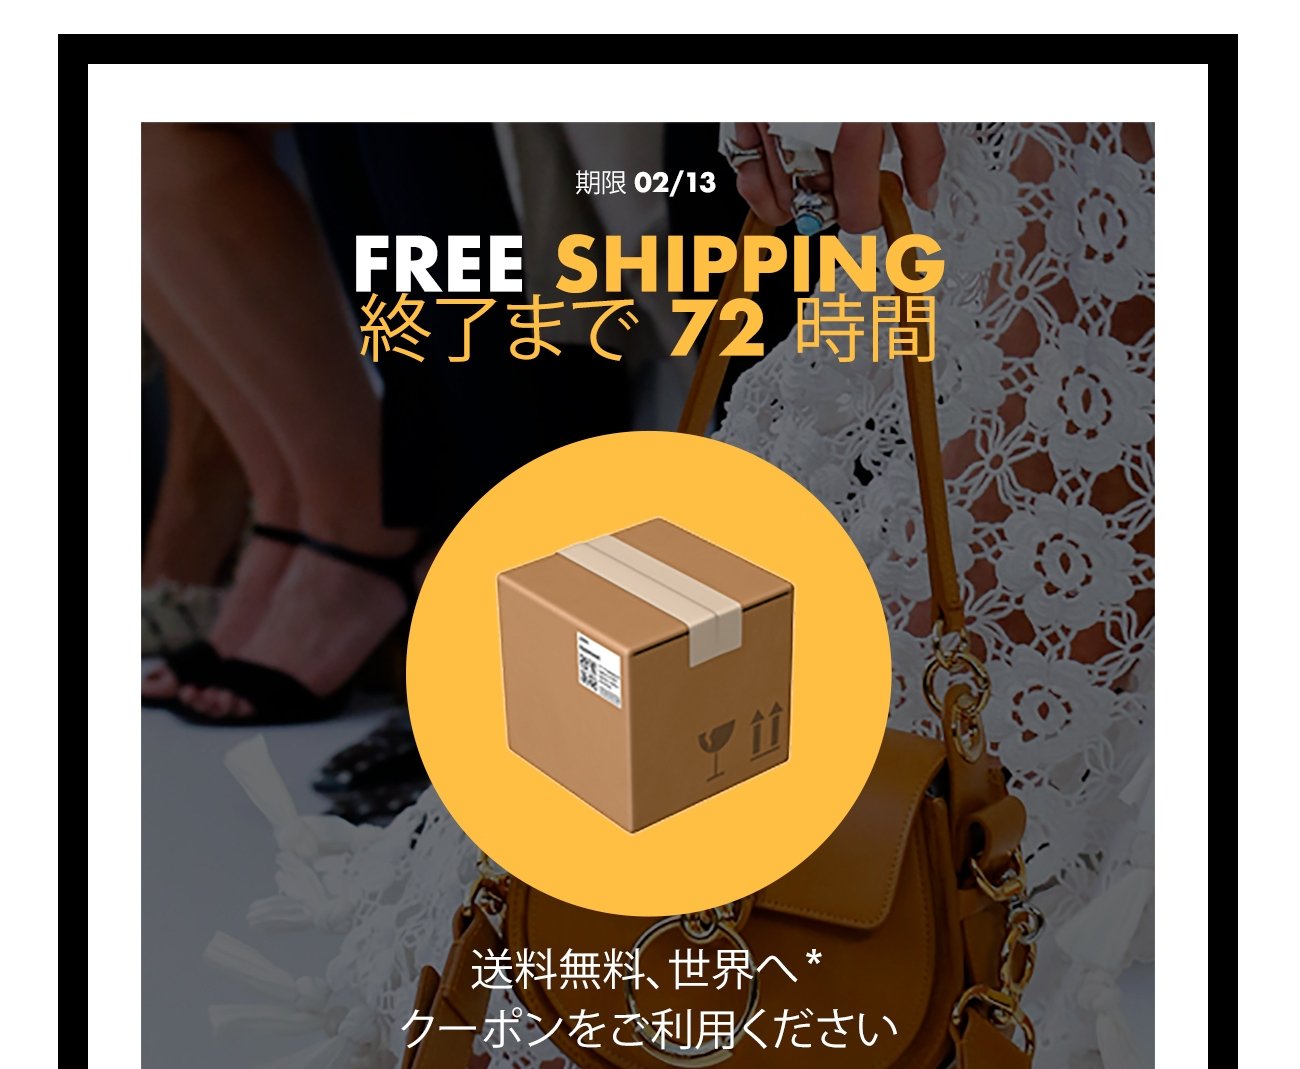 Enjoy Free Shipping With VIP Code